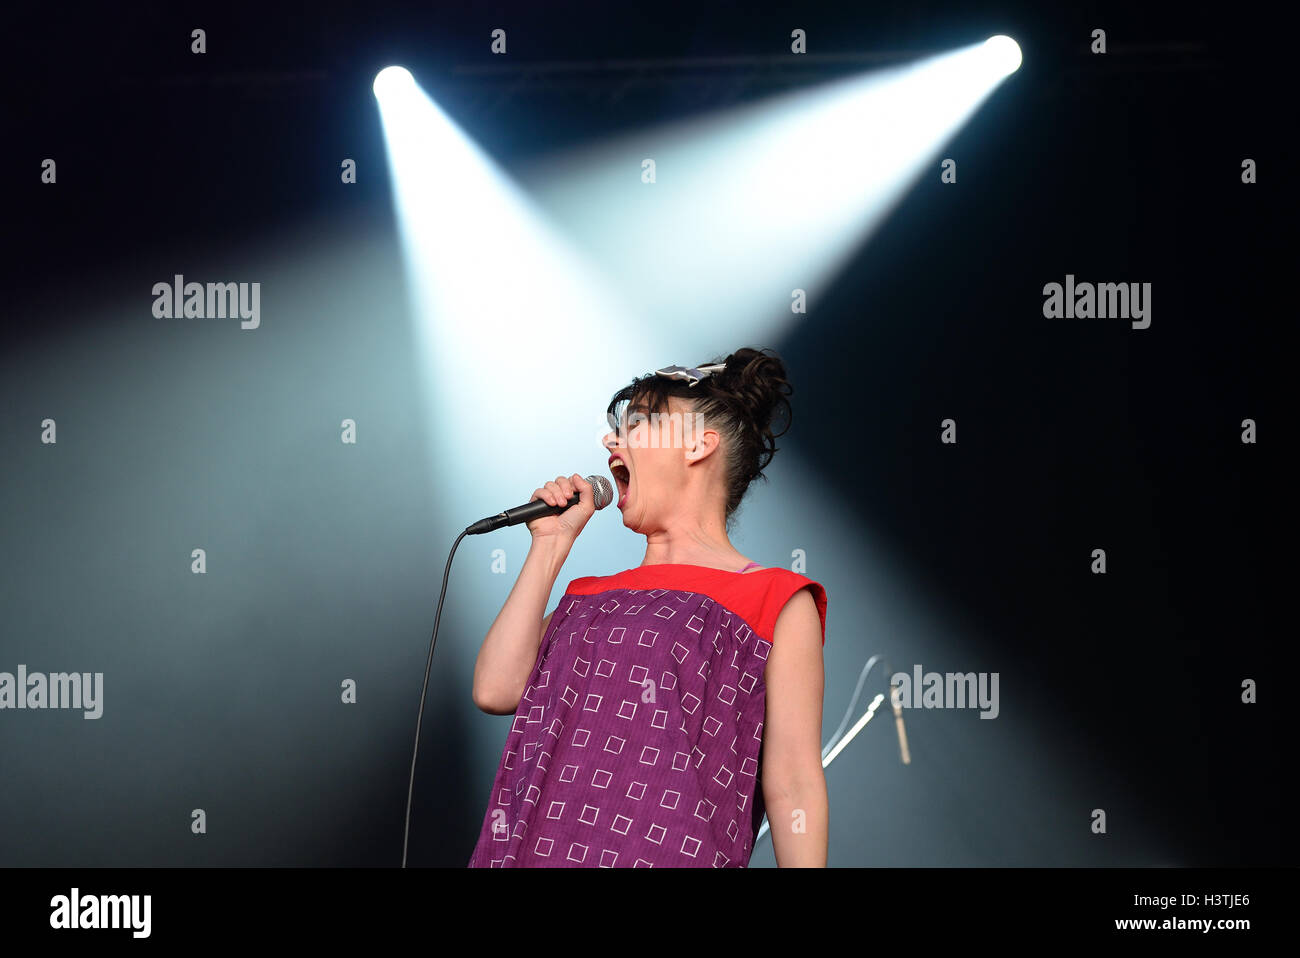 BARCELONA - MAY 29: The Julie Ruin (band) performs at Primavera Sound 2015 Festival, Ray-Ban stage. Stock Photo